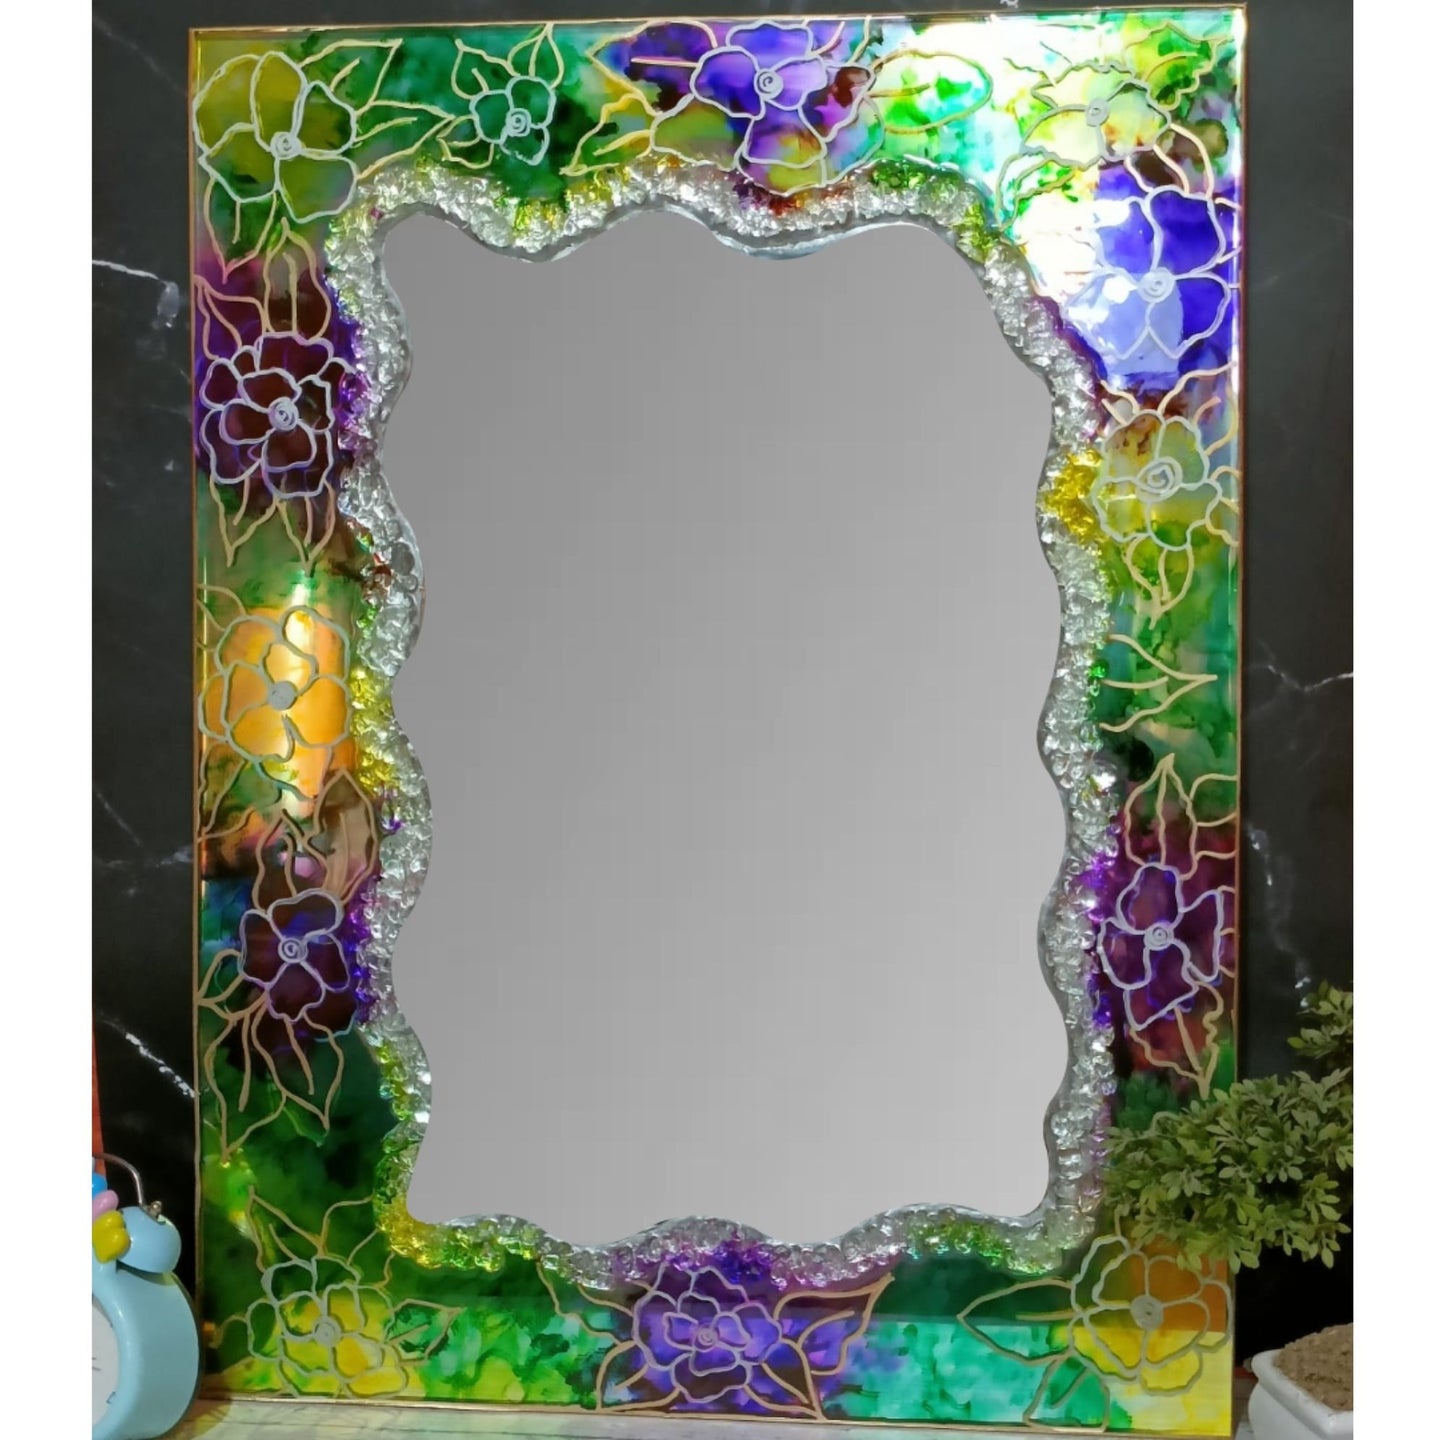 Resin abstract Mirror for Bathroom/ Living Room/ Home decoration.